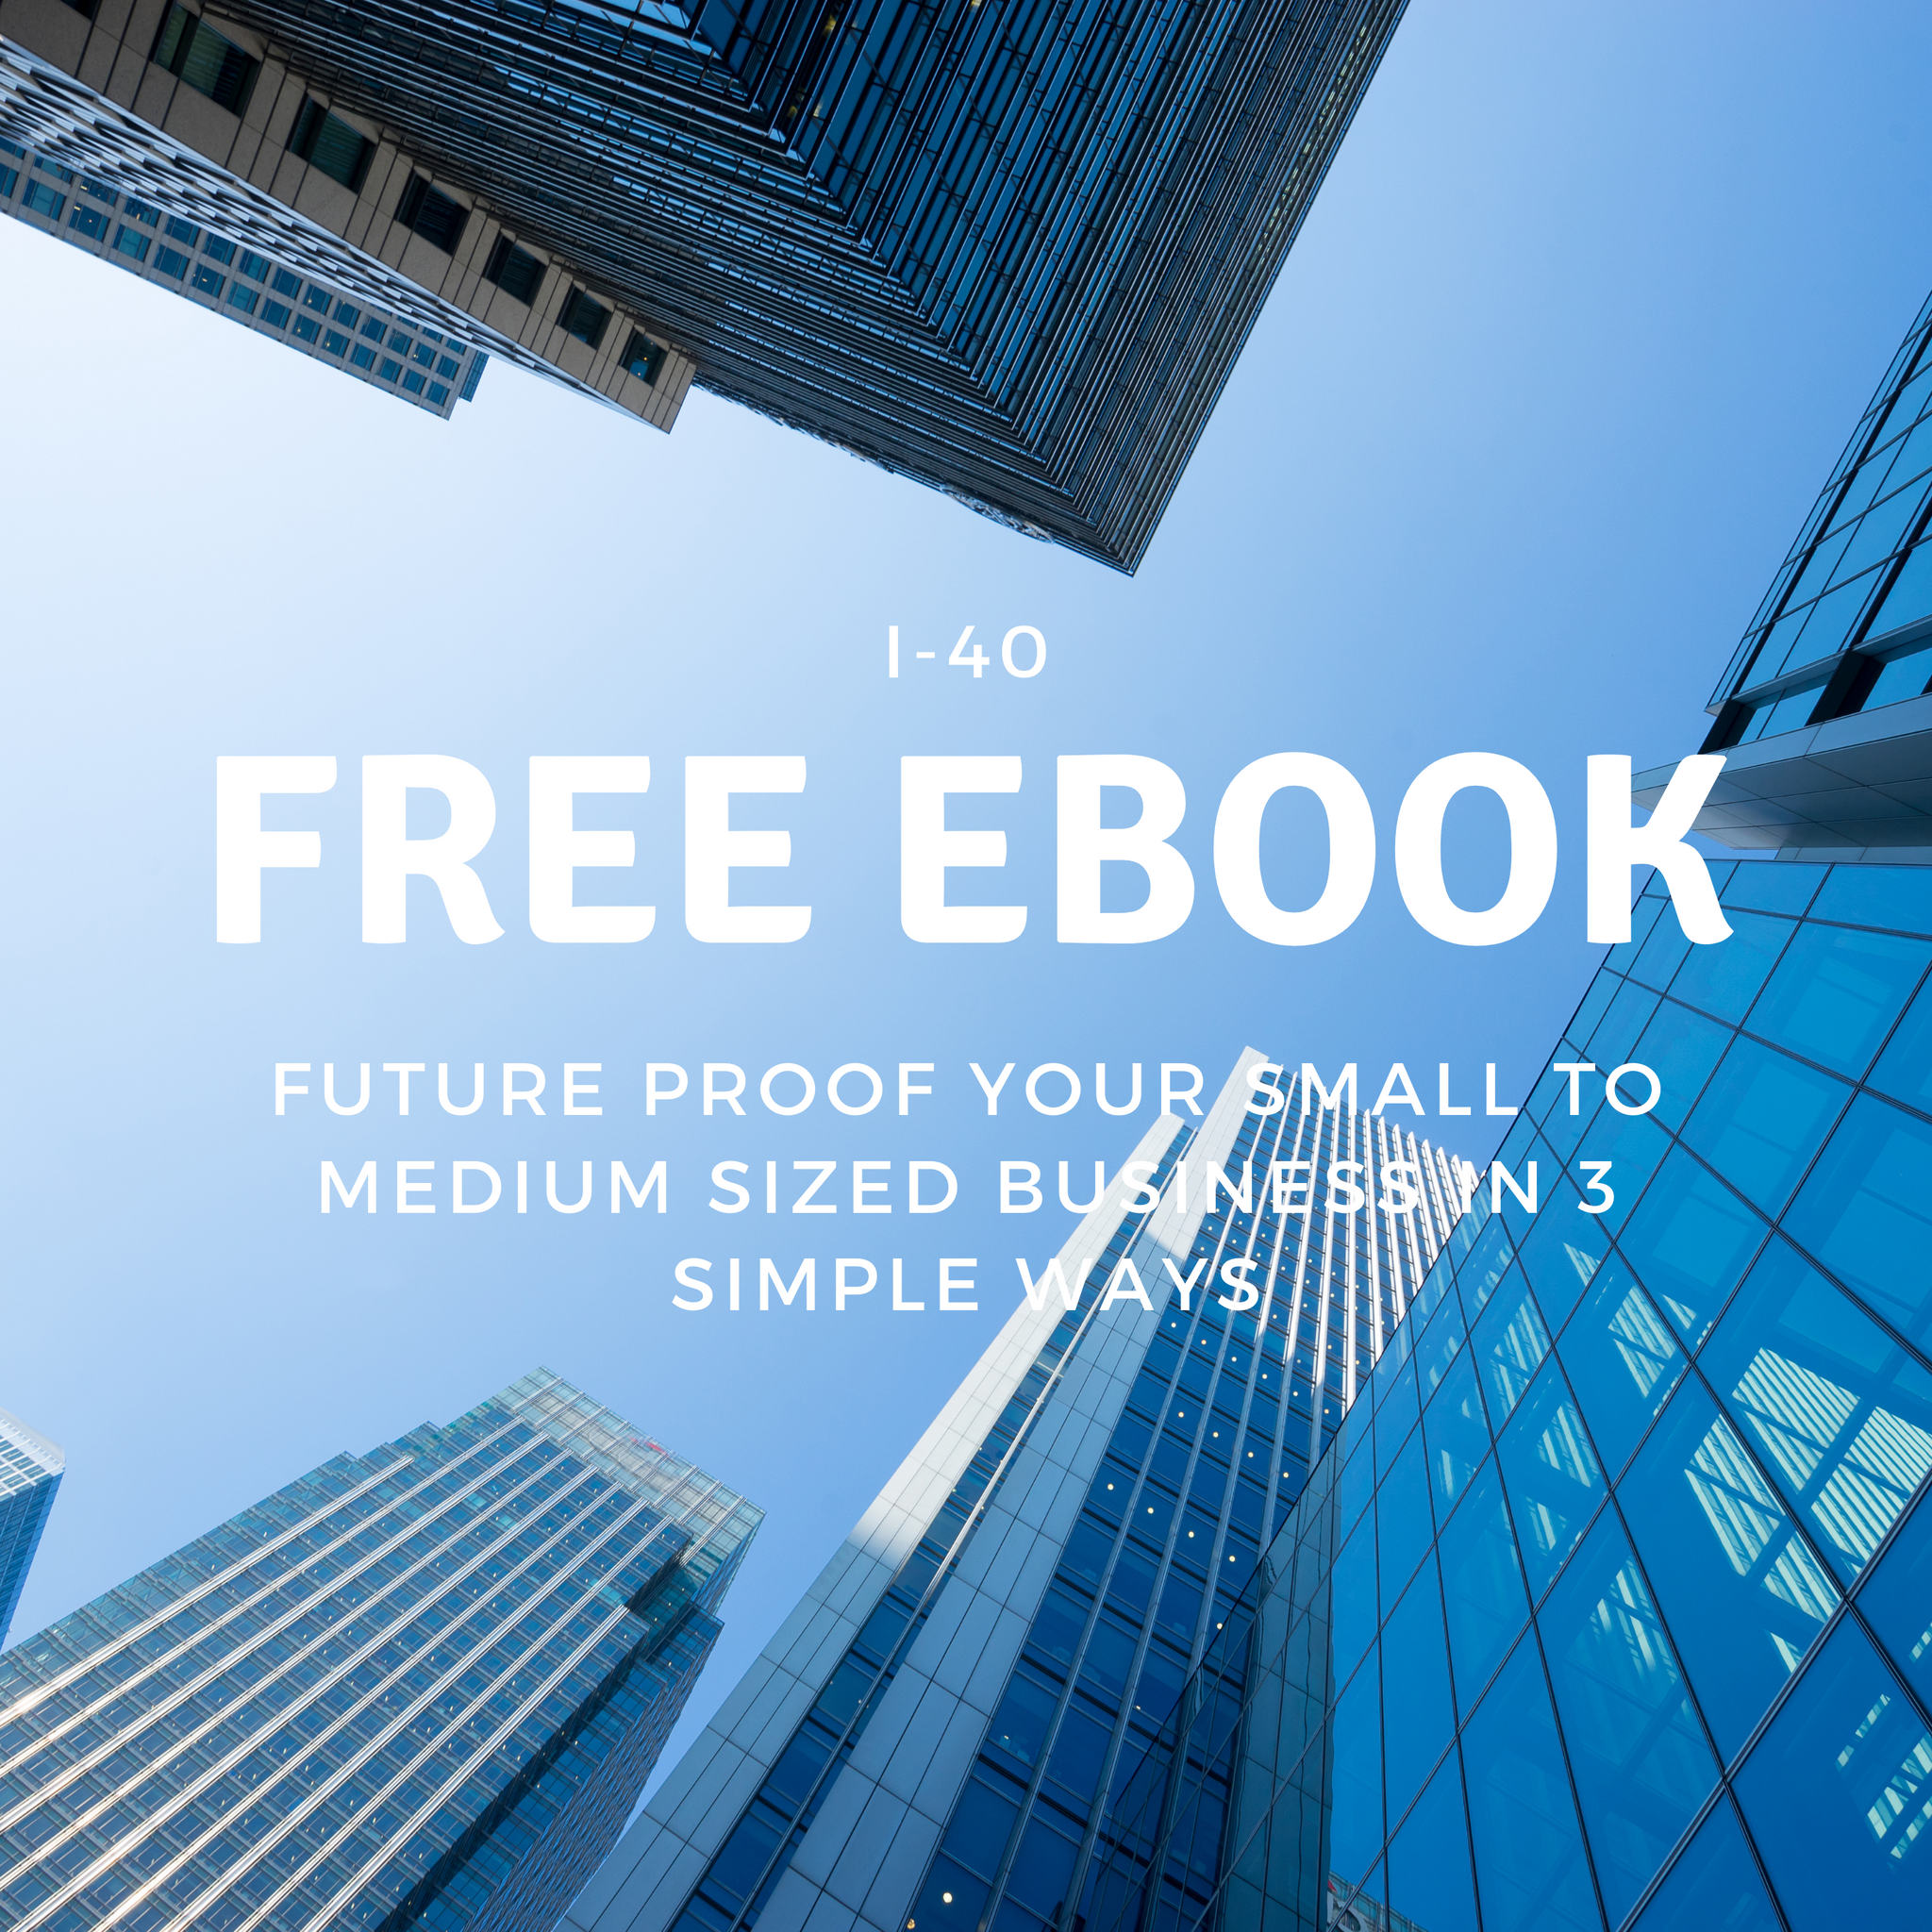 Free eBook: Future Proof Your Small to Medium Sized Business in 3 Simple Ways